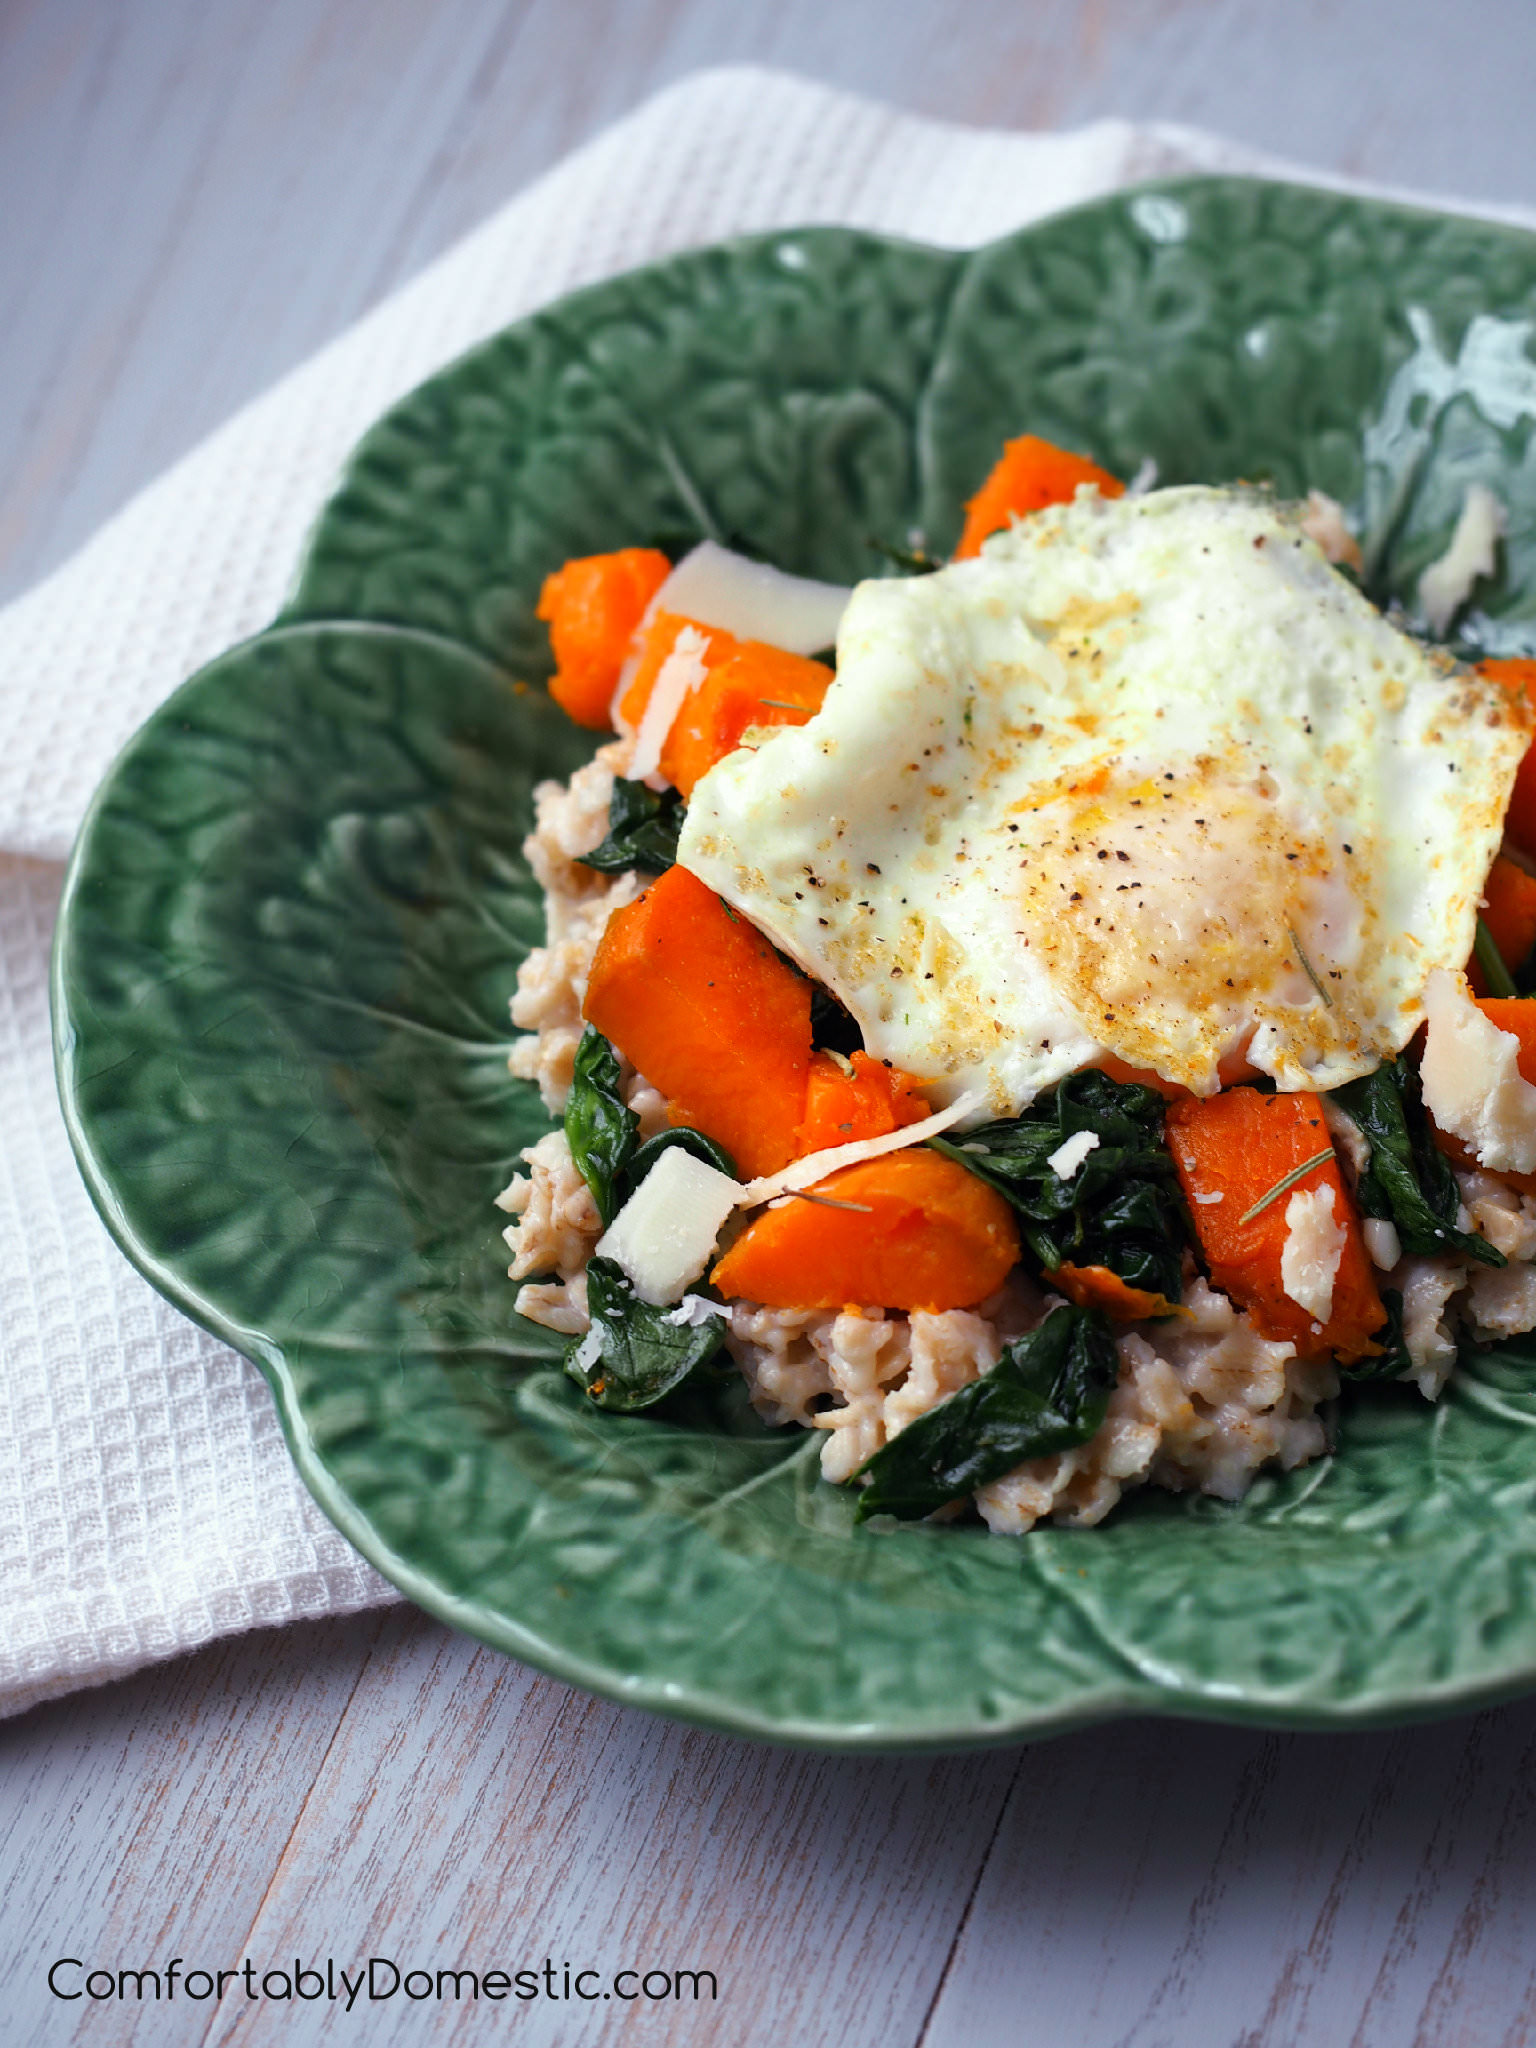 Savory oats are an infinitely satisfying way to start the day! Vibrant spinach, roasted sweet potatoes, and a farm fresh egg rest atop a bed of healthy oats for a delicious breakfast. | ComfortablyDomestic.com